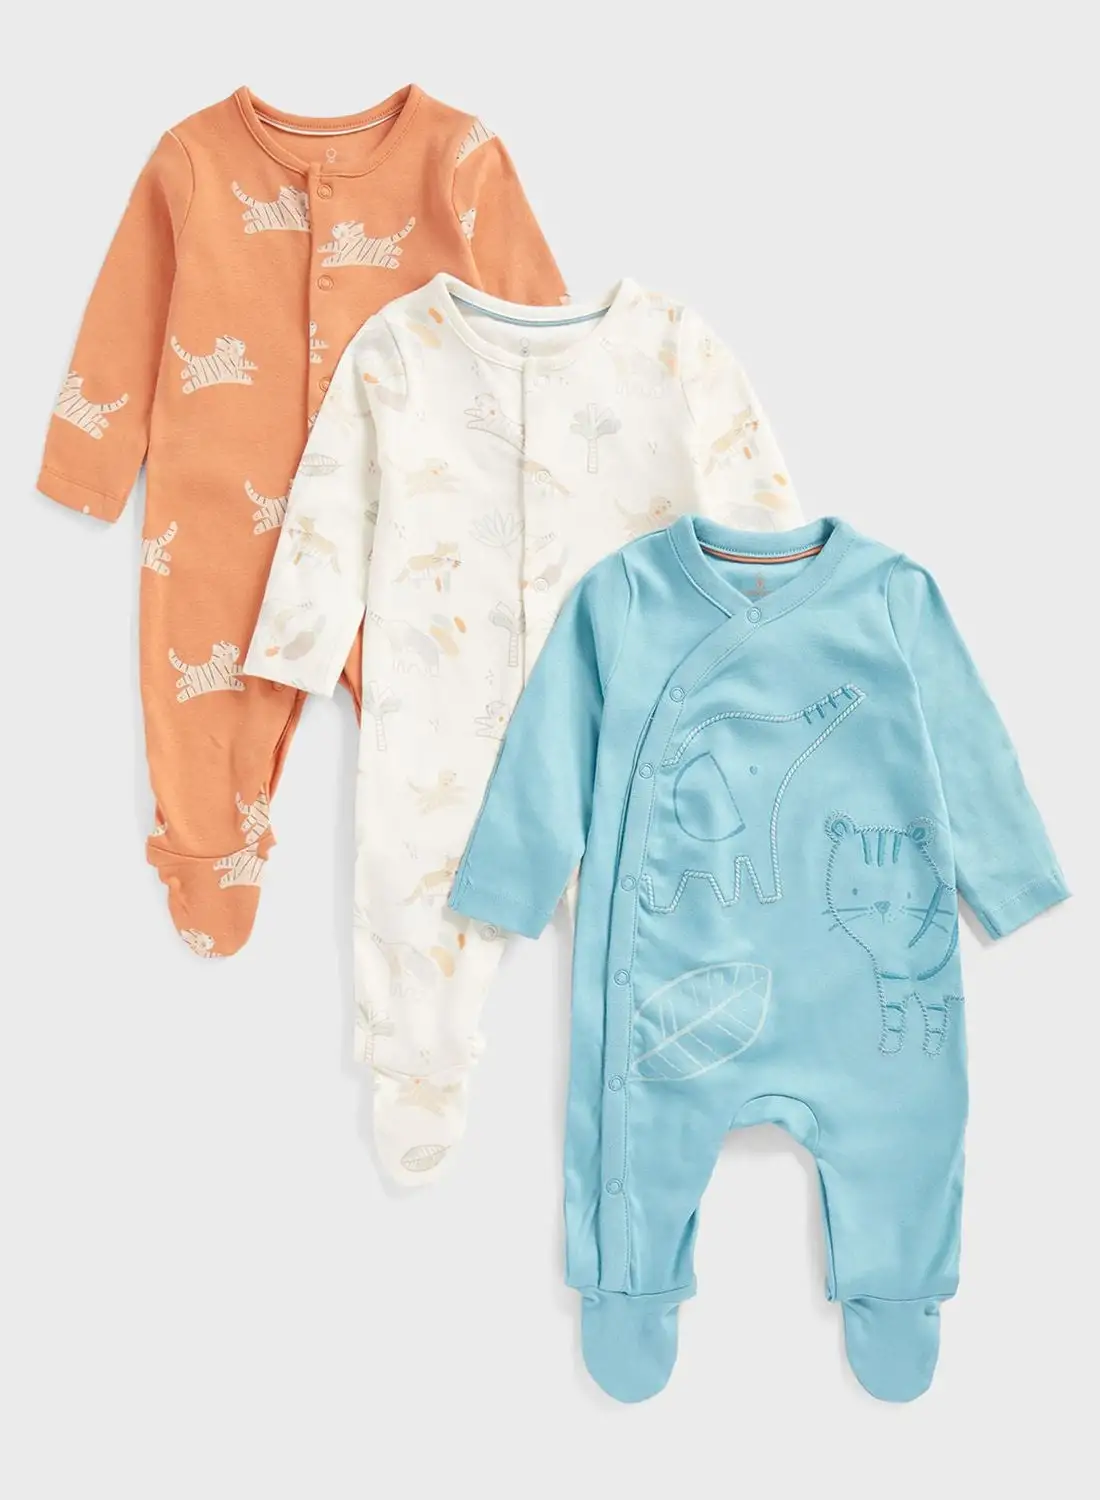 mothercare Infant 3 Pack Assorted Onesies